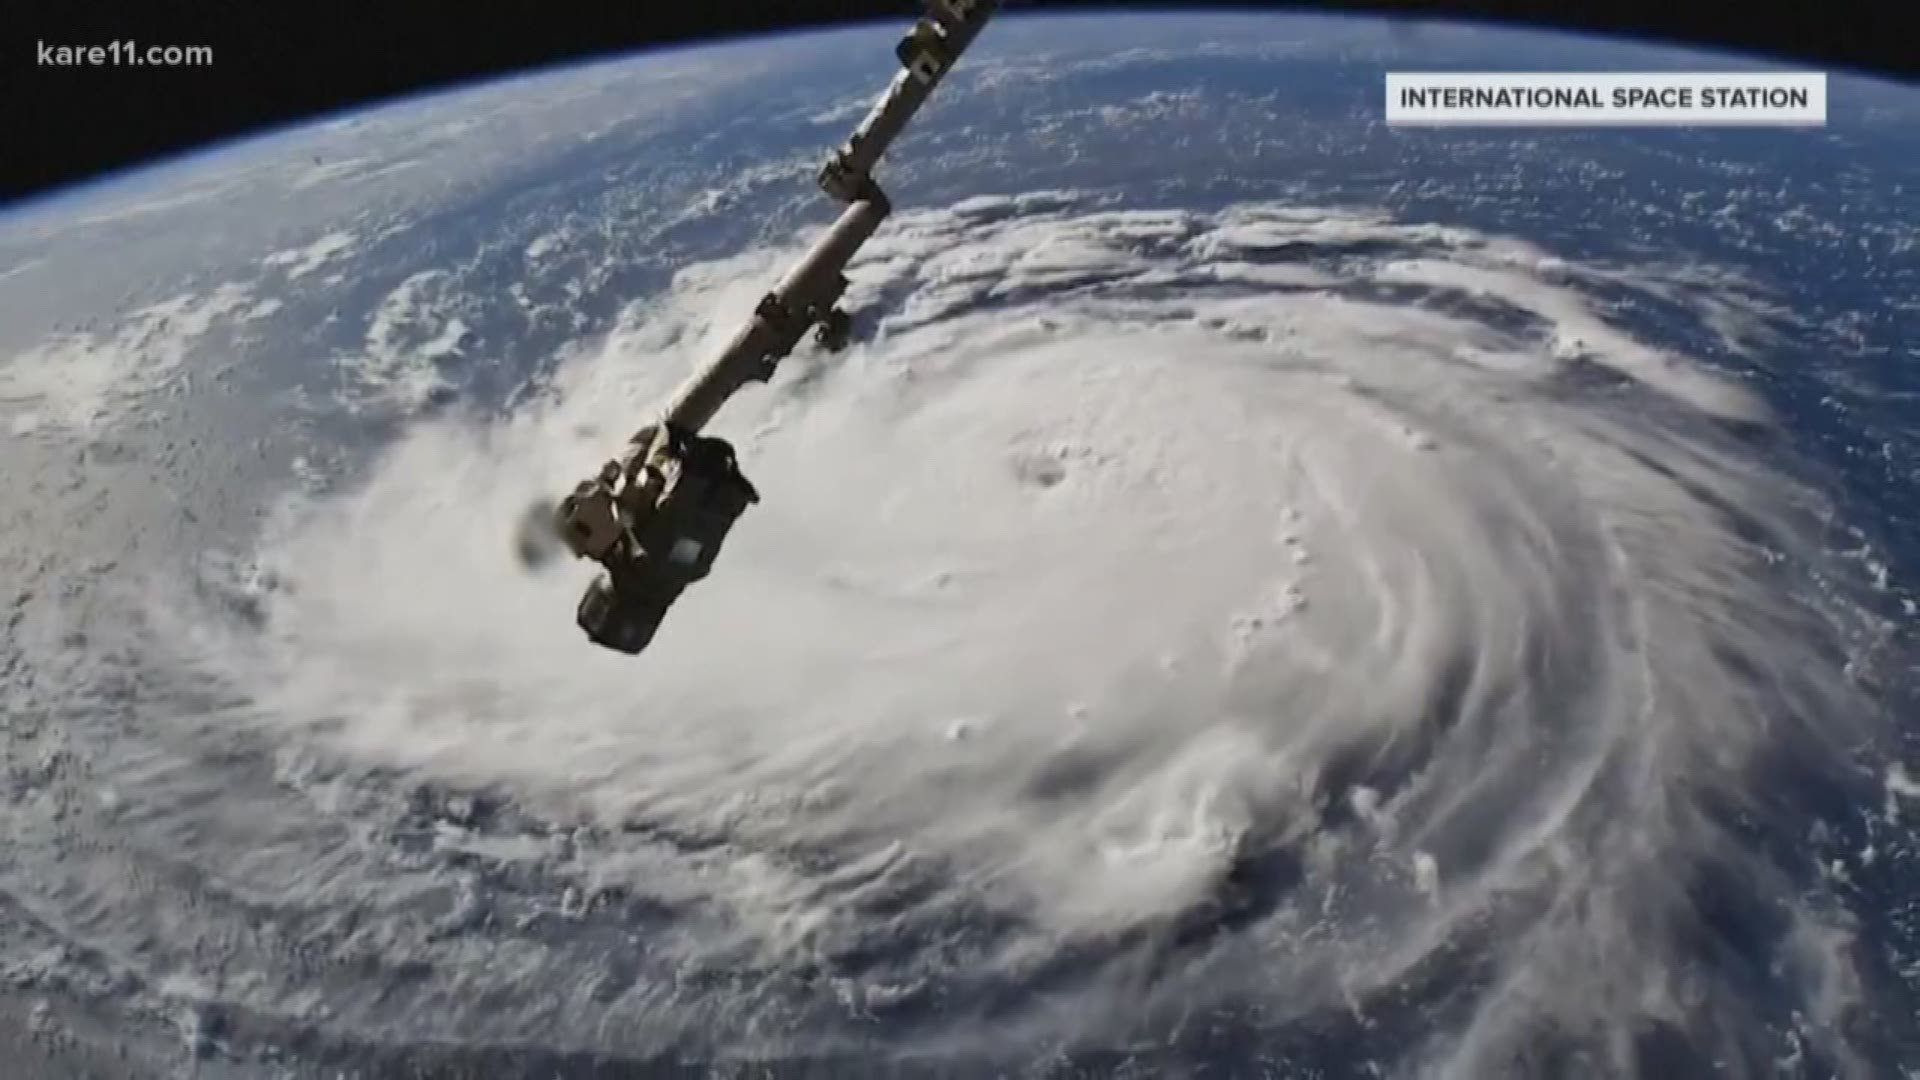 Stay or leave? Hurricane Florence is prompting mandatory evacuations, but not everyone is running away. Chris Hrapsky talks with two families in the path of the storm, both making different choices. https://kare11.tv/2MsfN7a